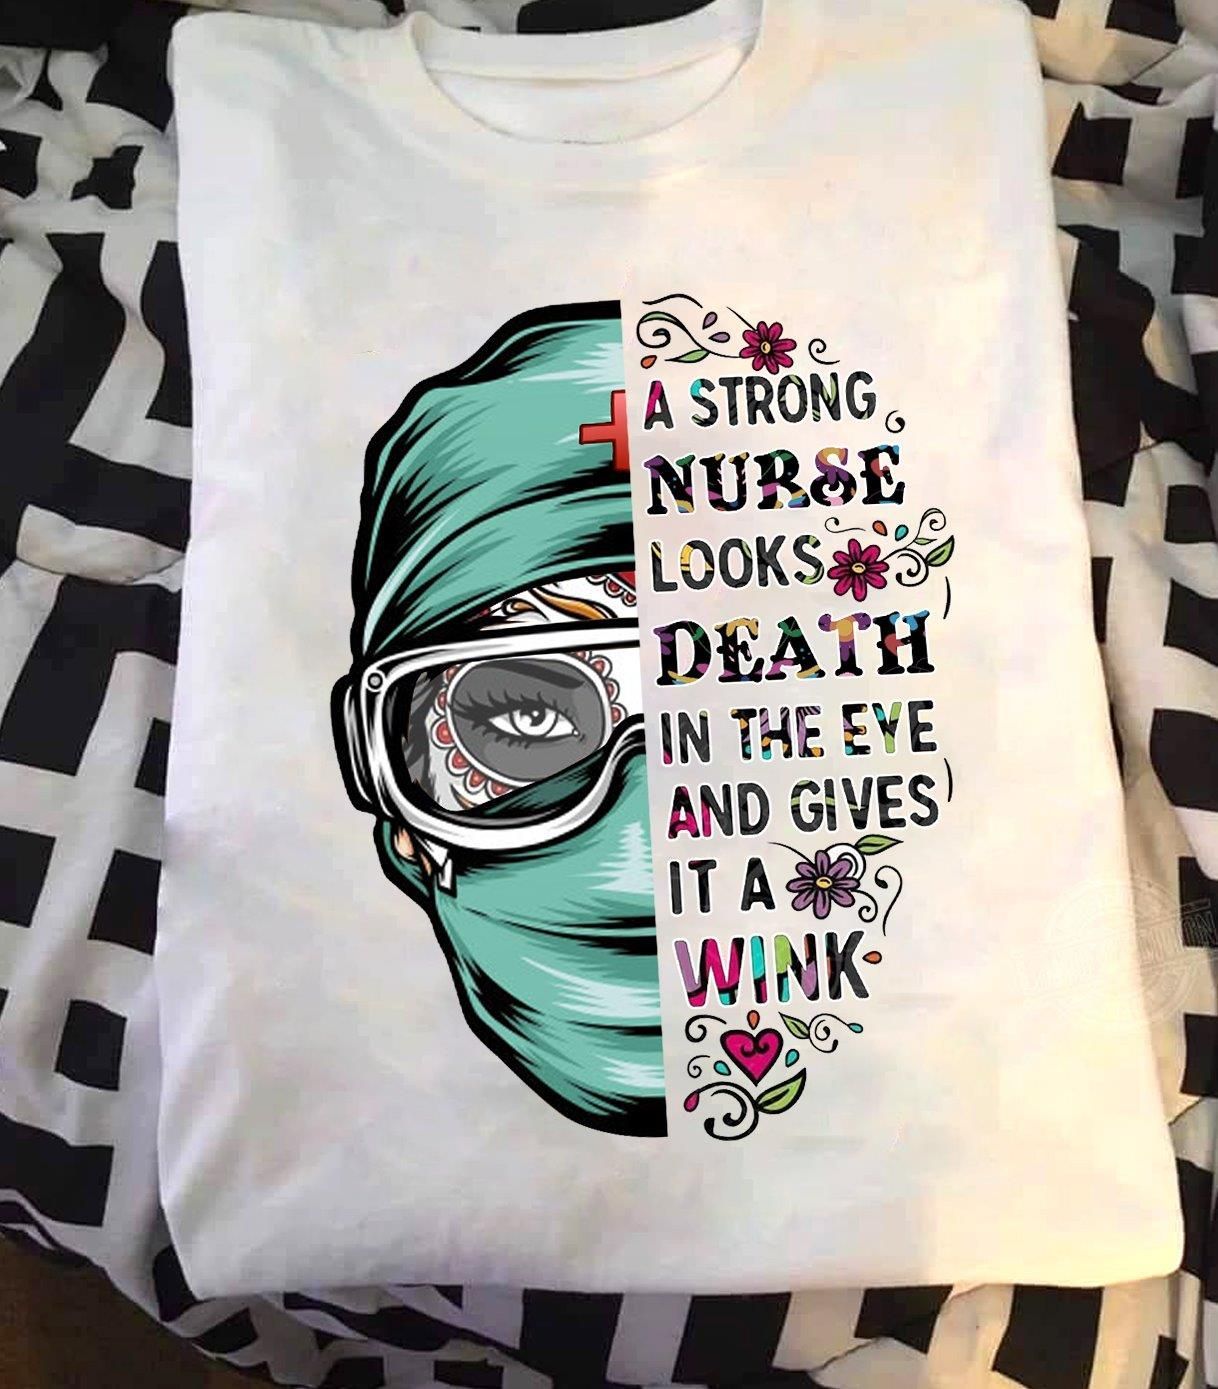 PresentsPrints, Nurse a strong nurse look death in the eye and gives it a wink, Nurse T-Shirt